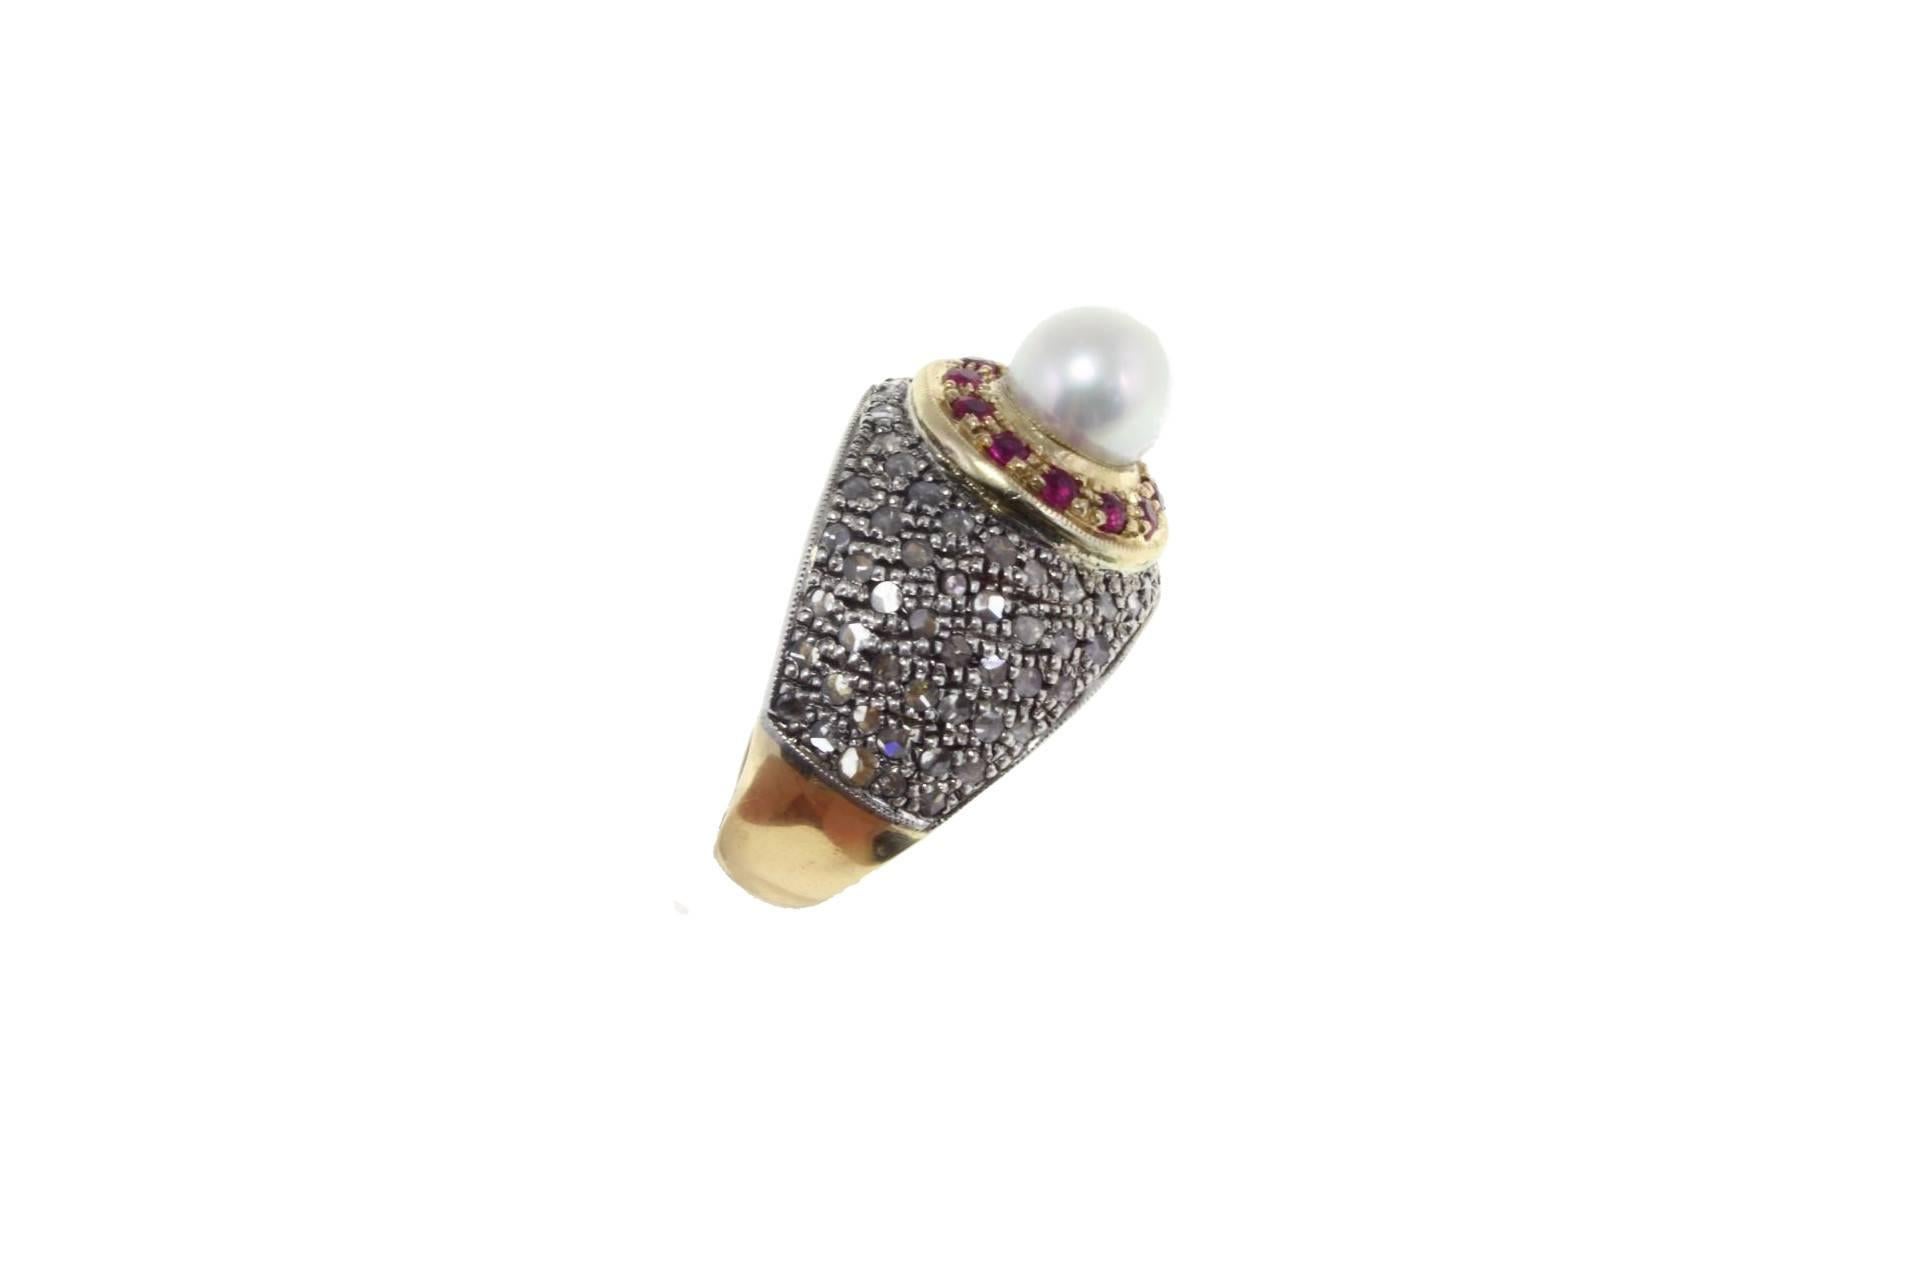 Elegant dome ring in 14kt yellow gold and silver composed of a central pearl surrounded by 12 shiny rubies all on an expance of encrusted diamonds.

diamond 0.73kt
tot weight 11.7gr
r.f.  ggch